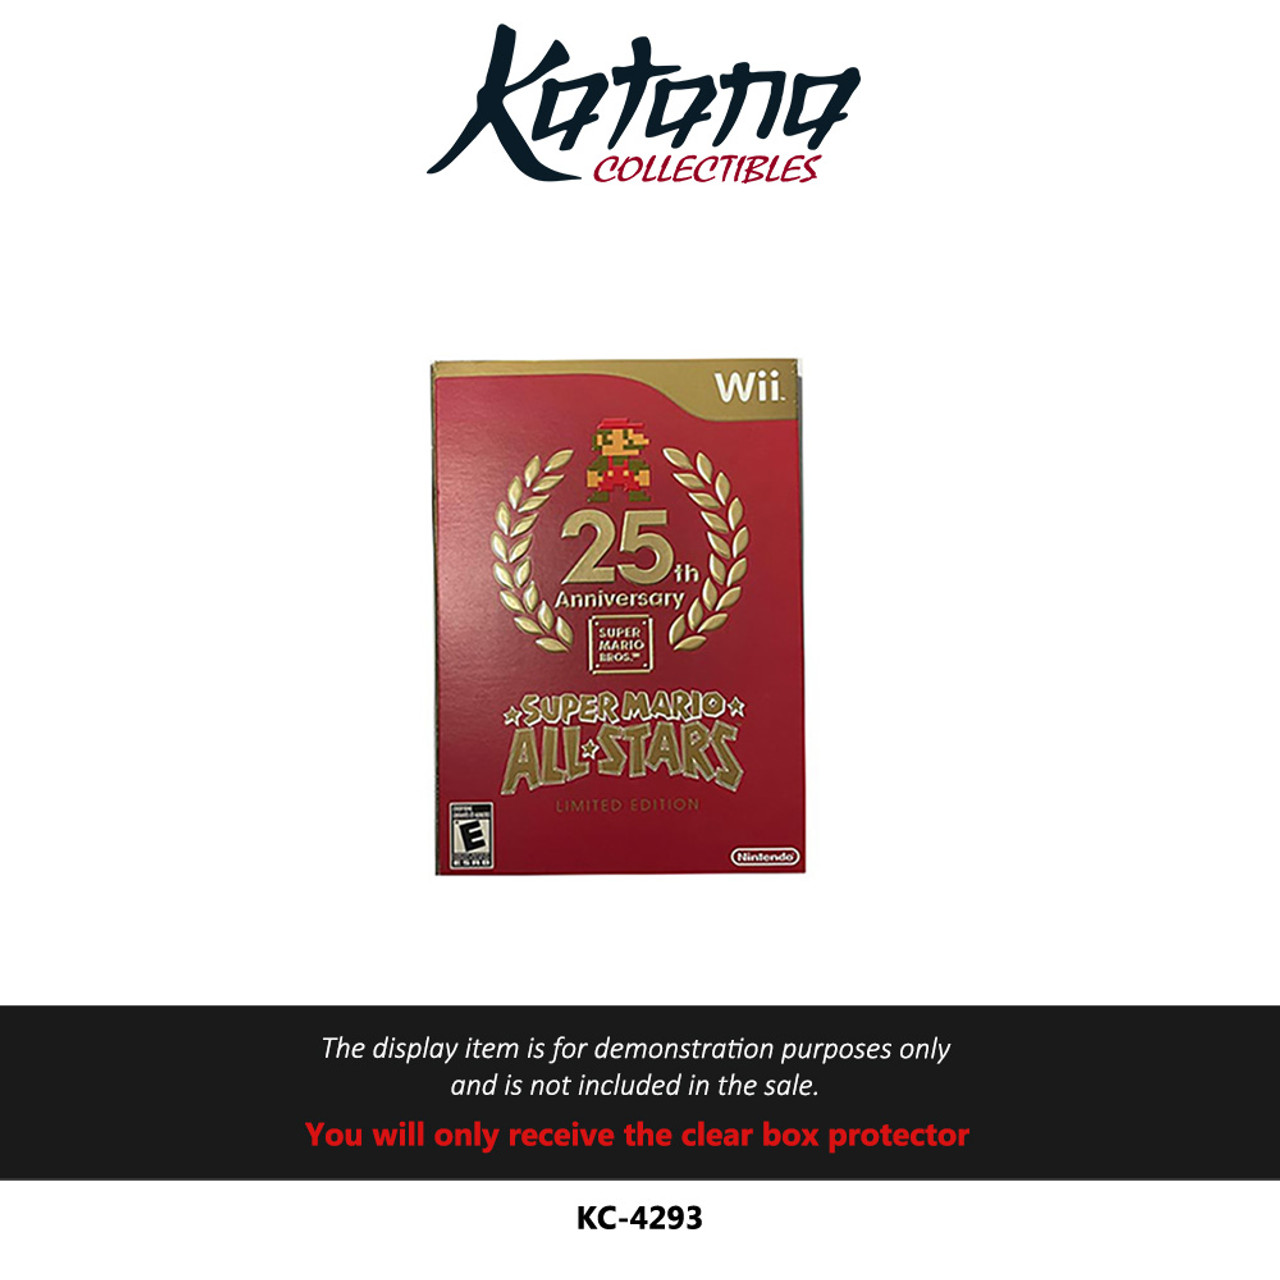 Katana Collectibles Protector For Super Mario All Stars: Limited Edition Wii 25th Anniversary